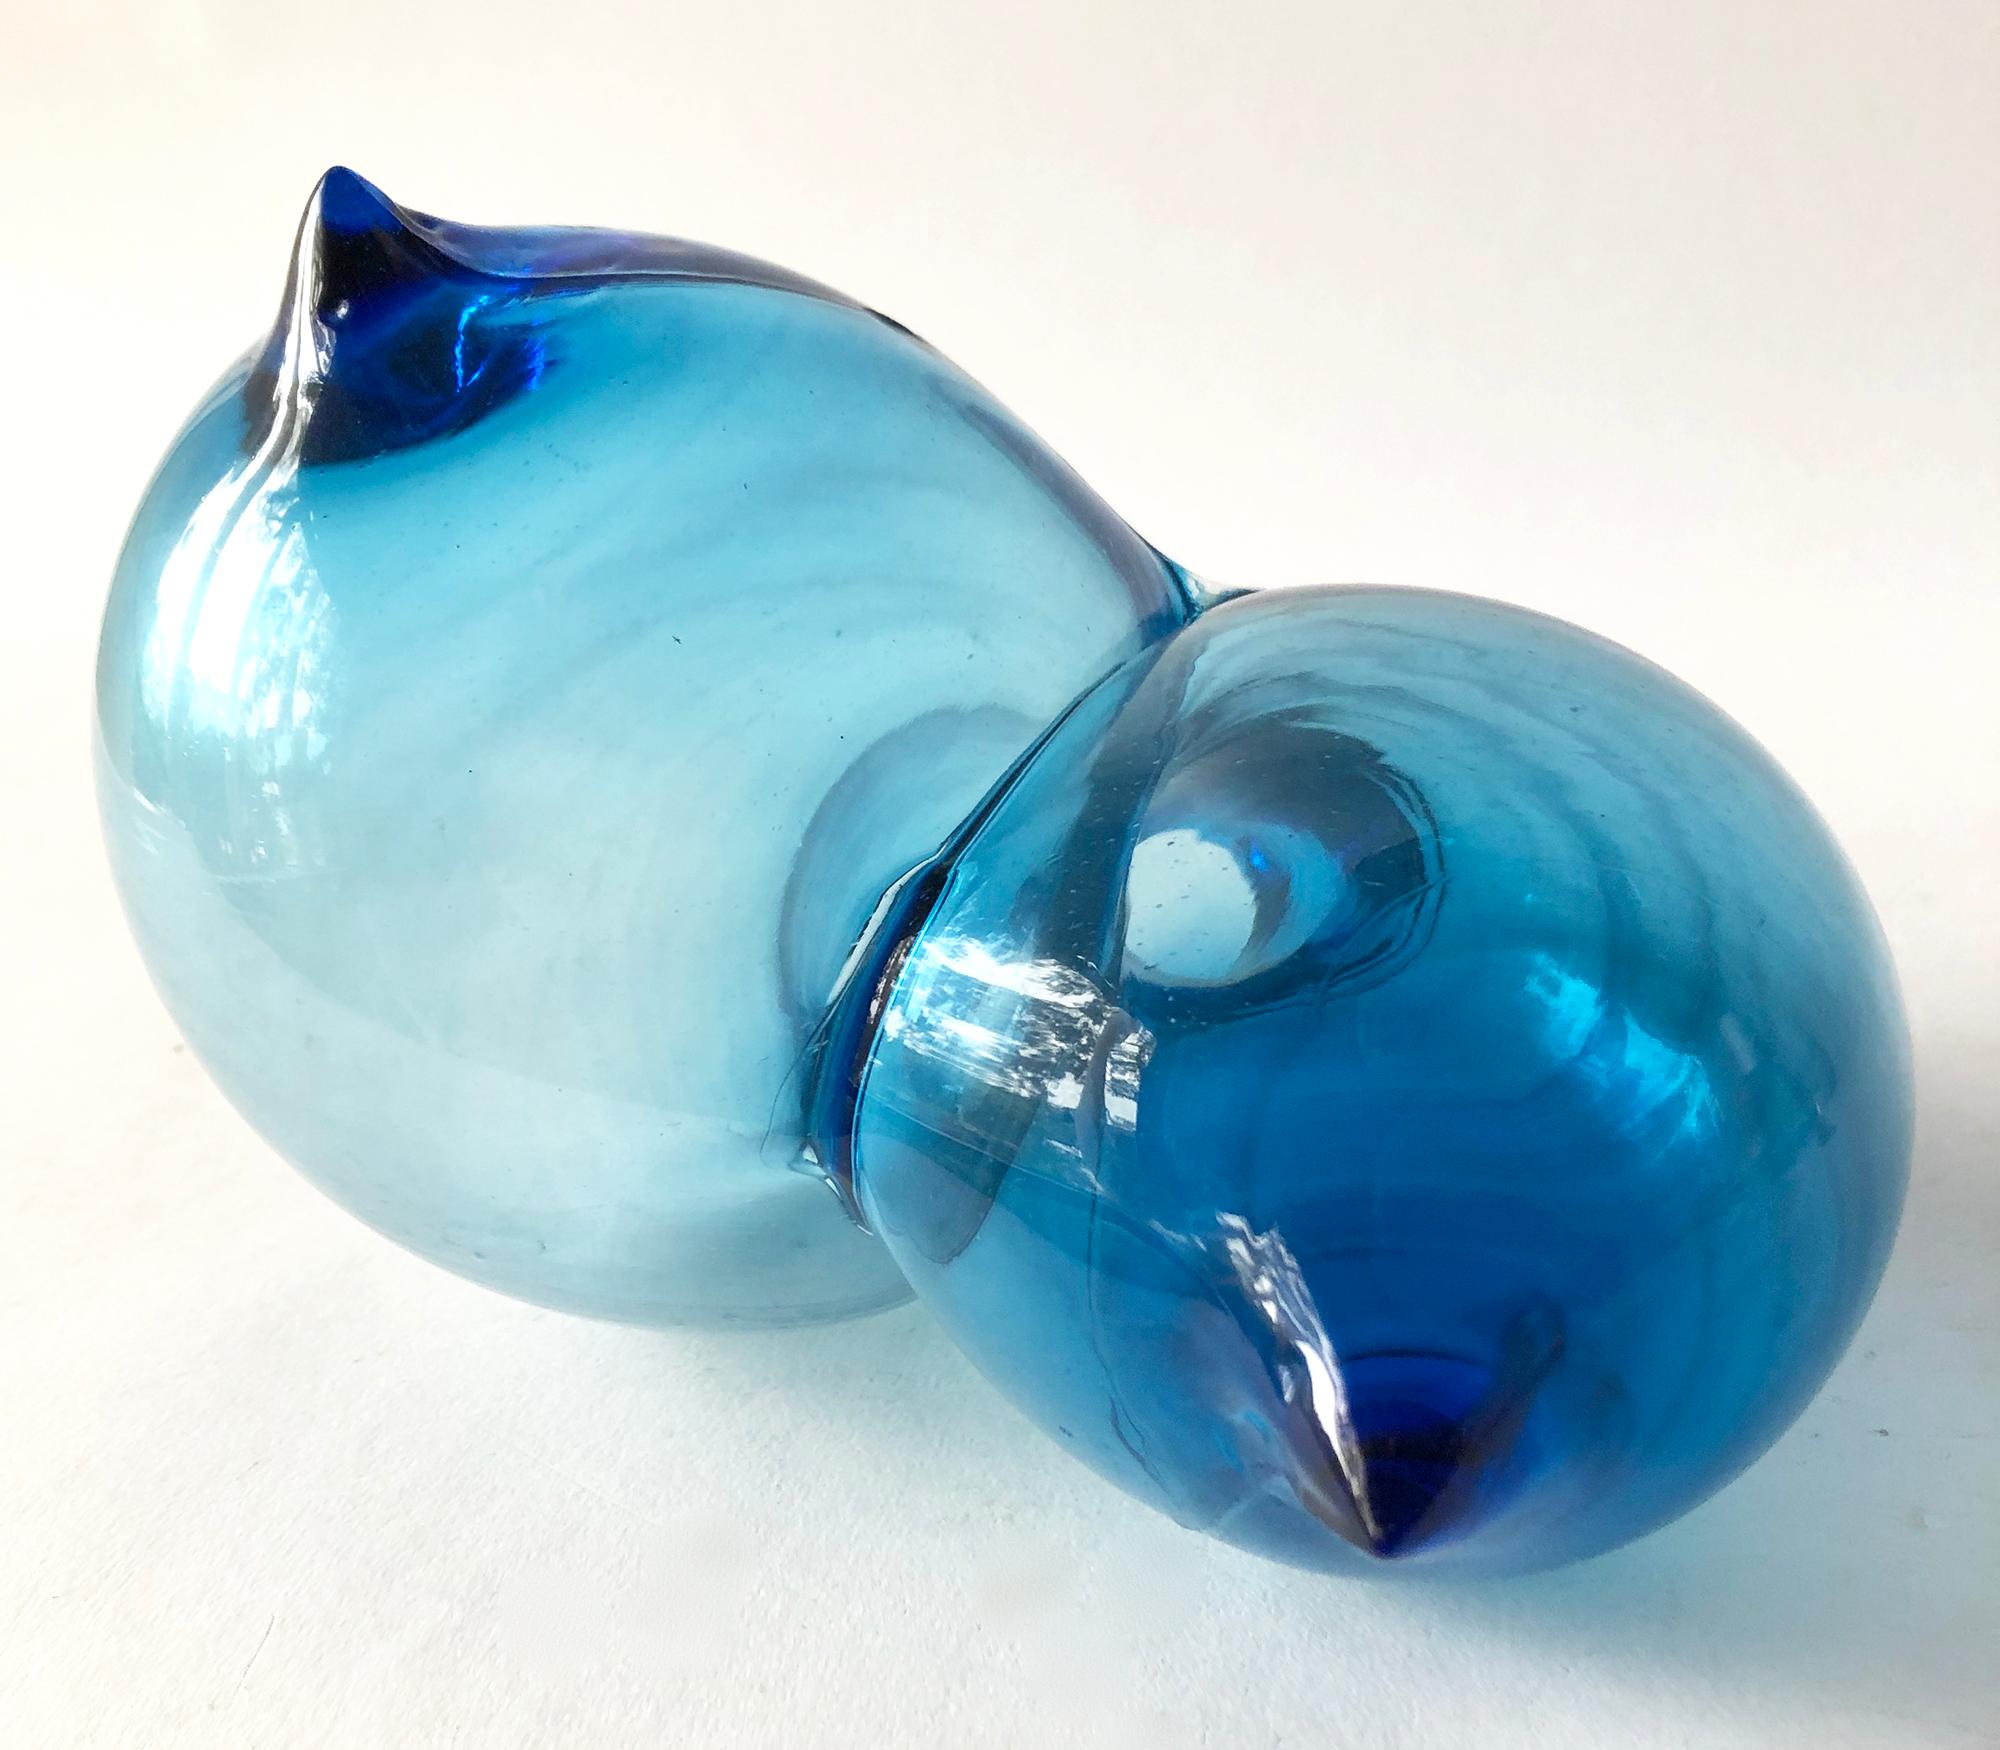 Untitled hand blown glass sculpture created by Gary Beecham of Spruce Pine, North Carolina. Sculpture measures: 4 1/2